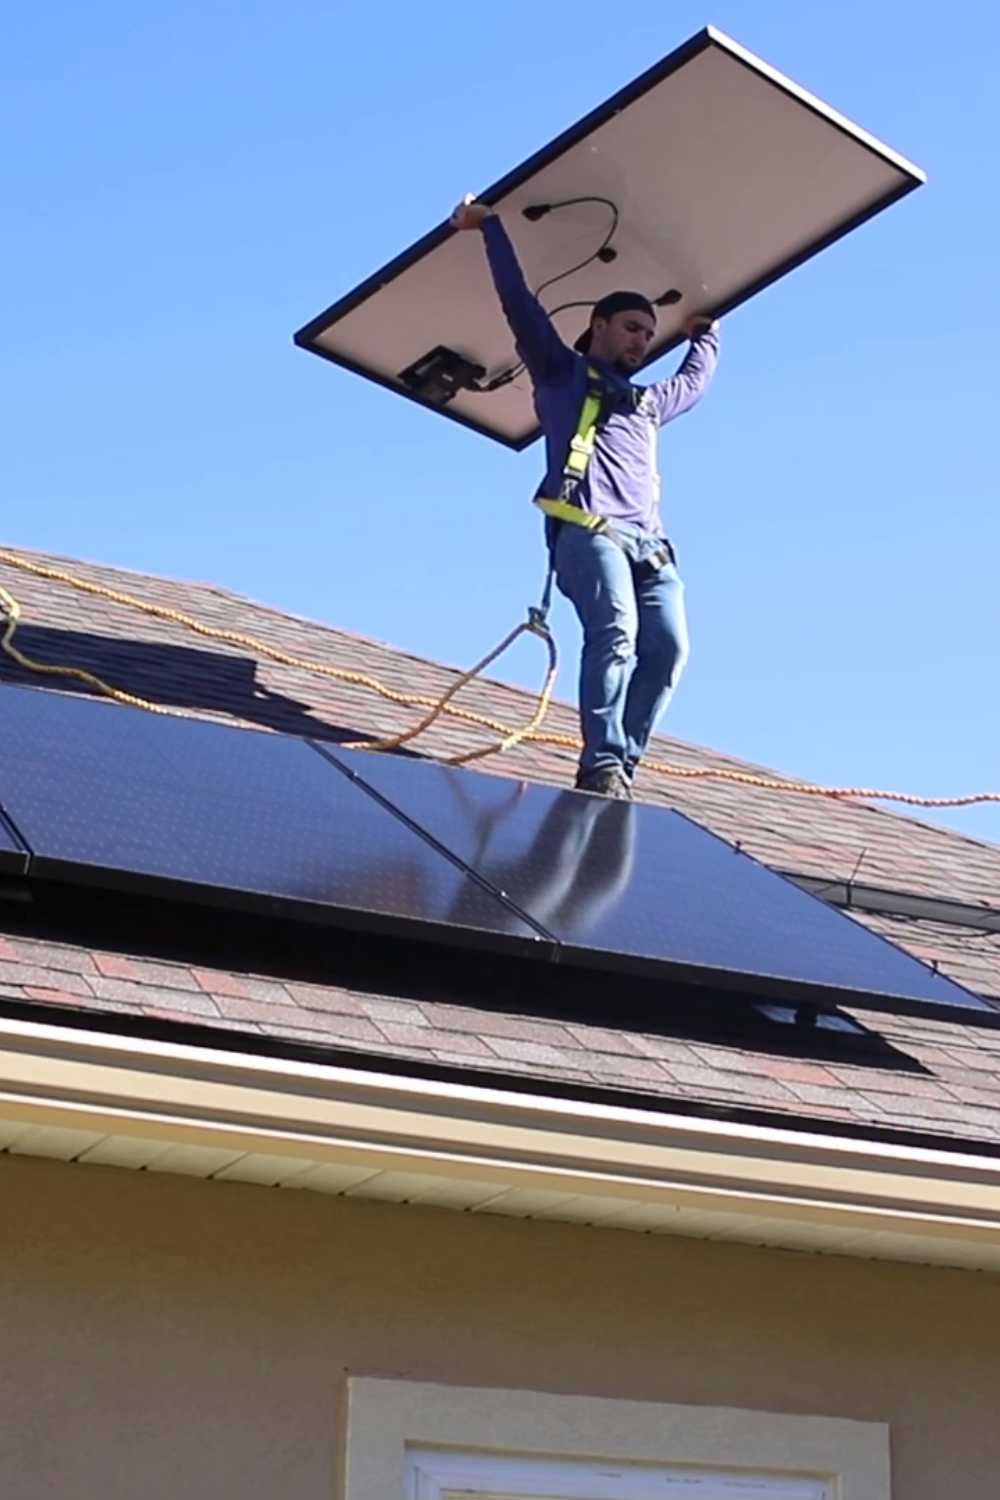 solar installer carrying rooftop solar panel when installing home energy system